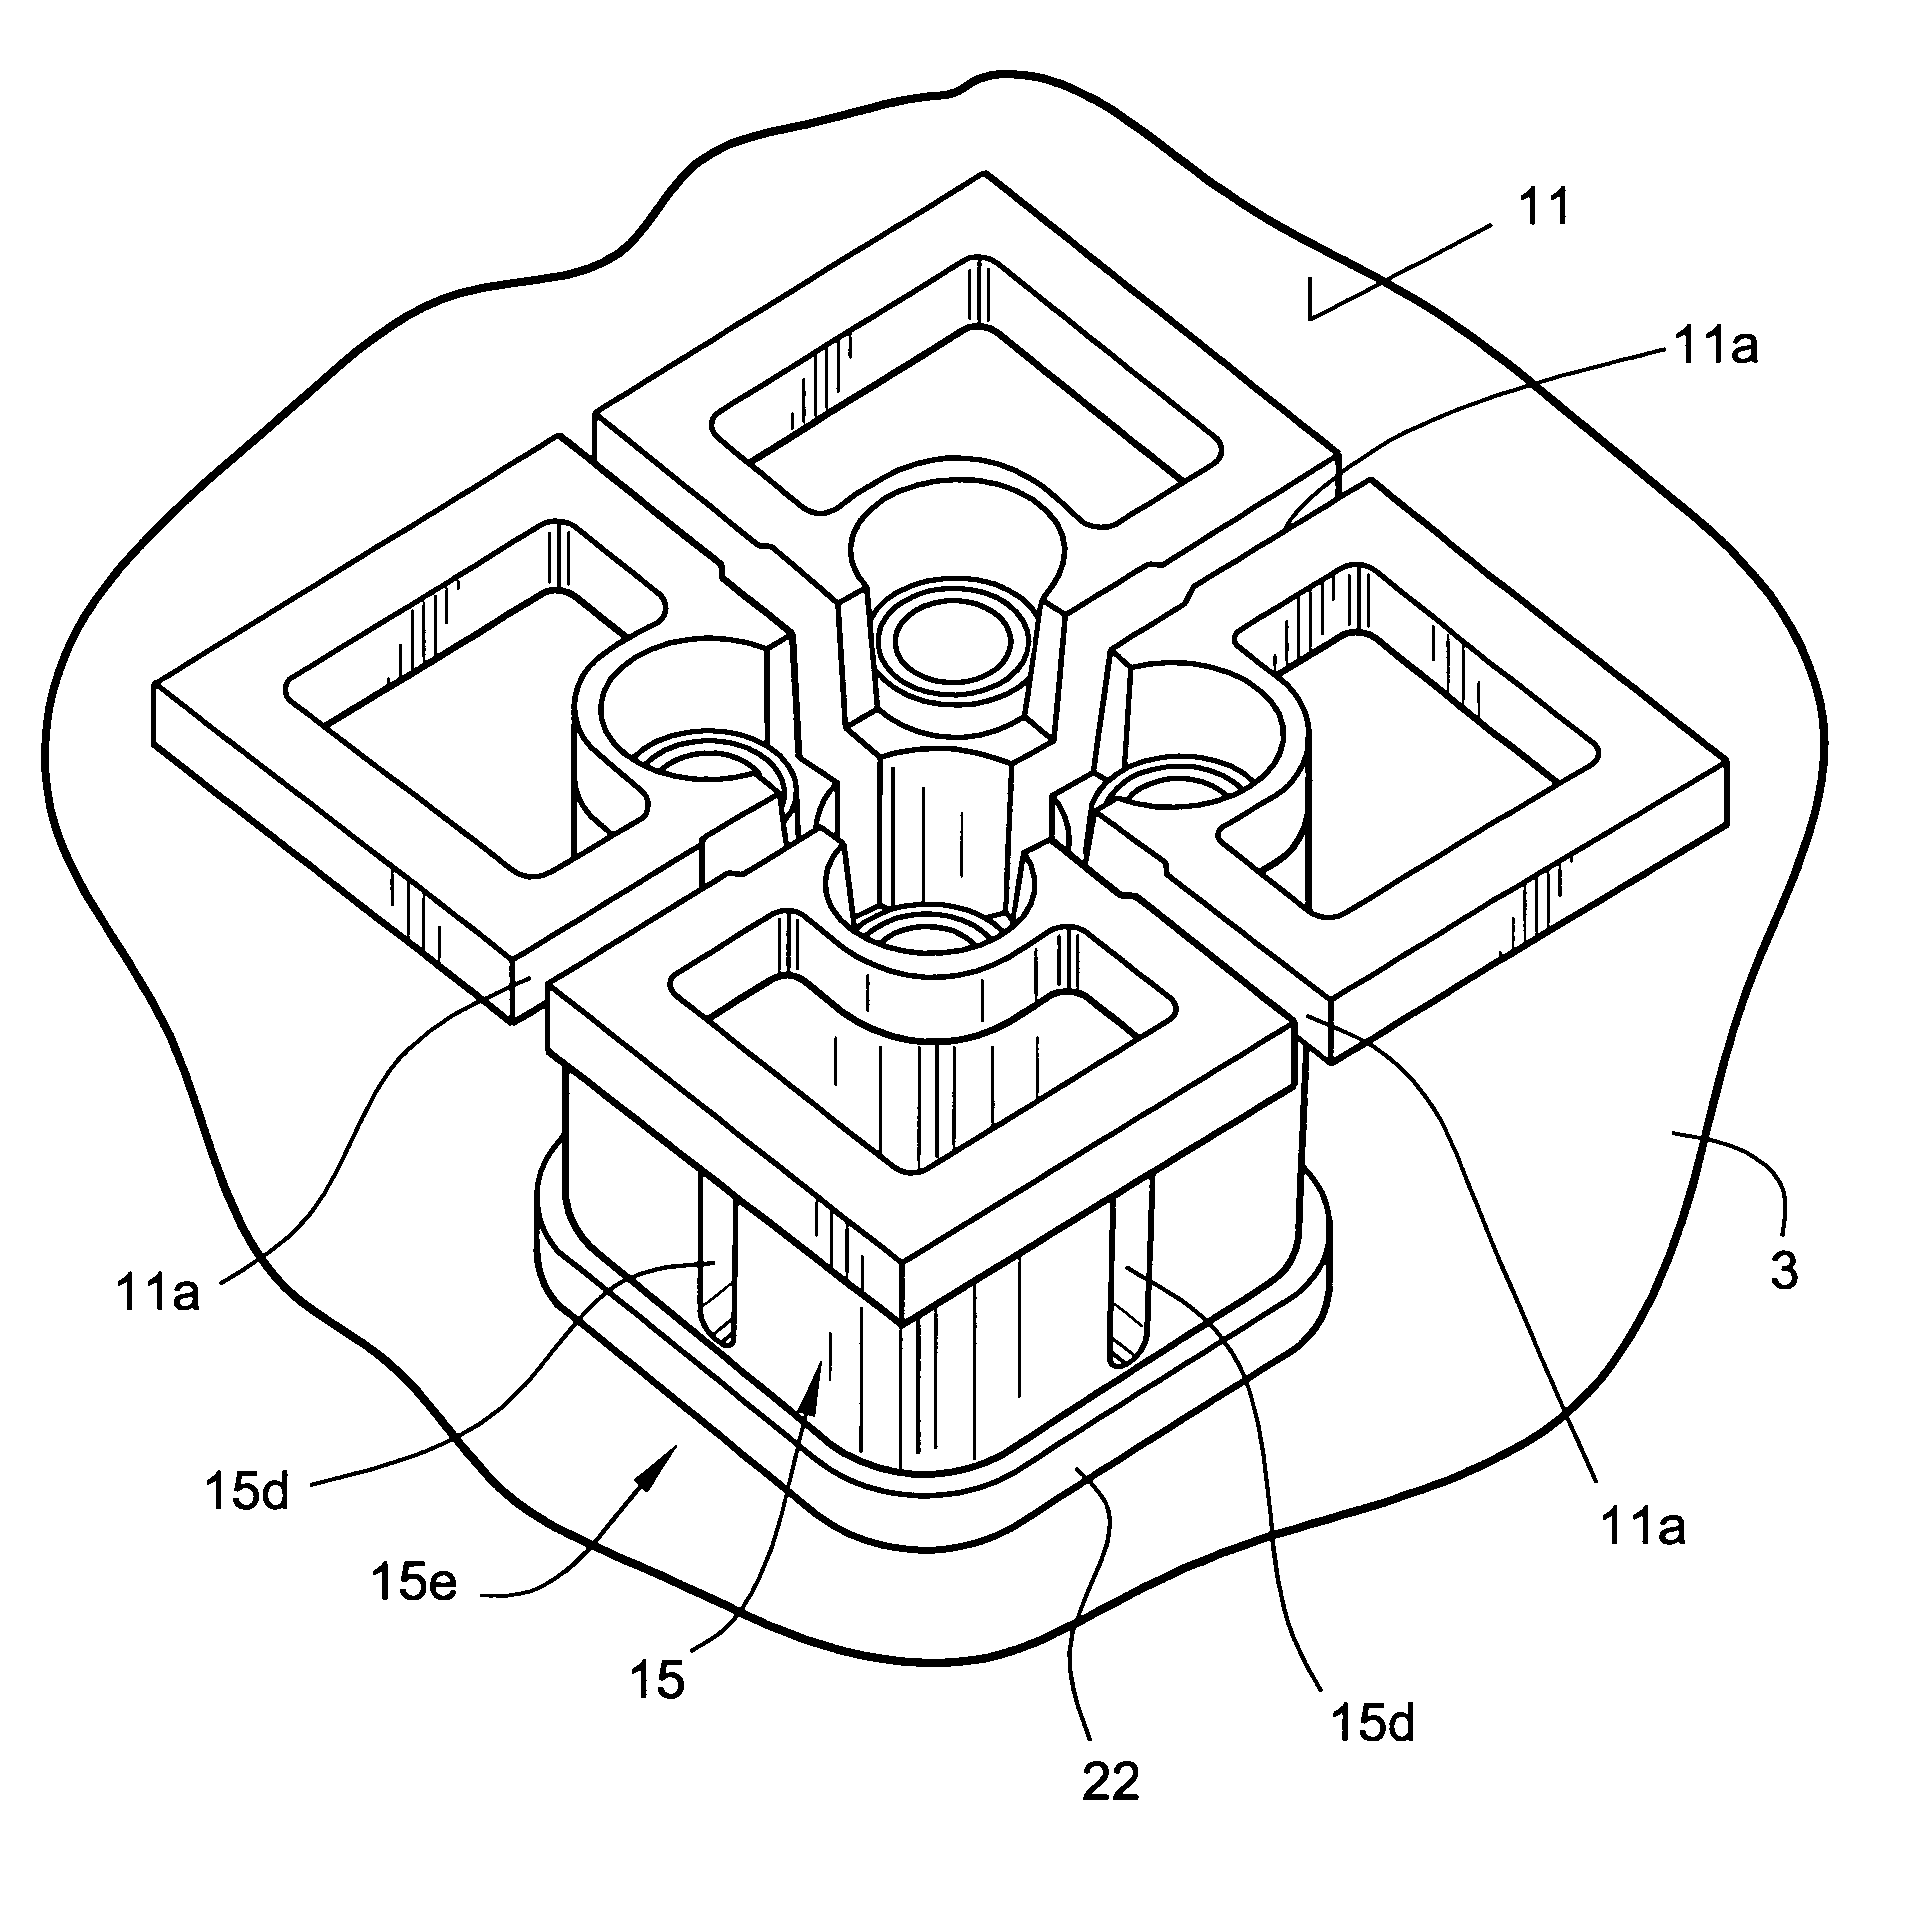 Antenna having at least one dipole or an antenna element arrangement similar to a dipole